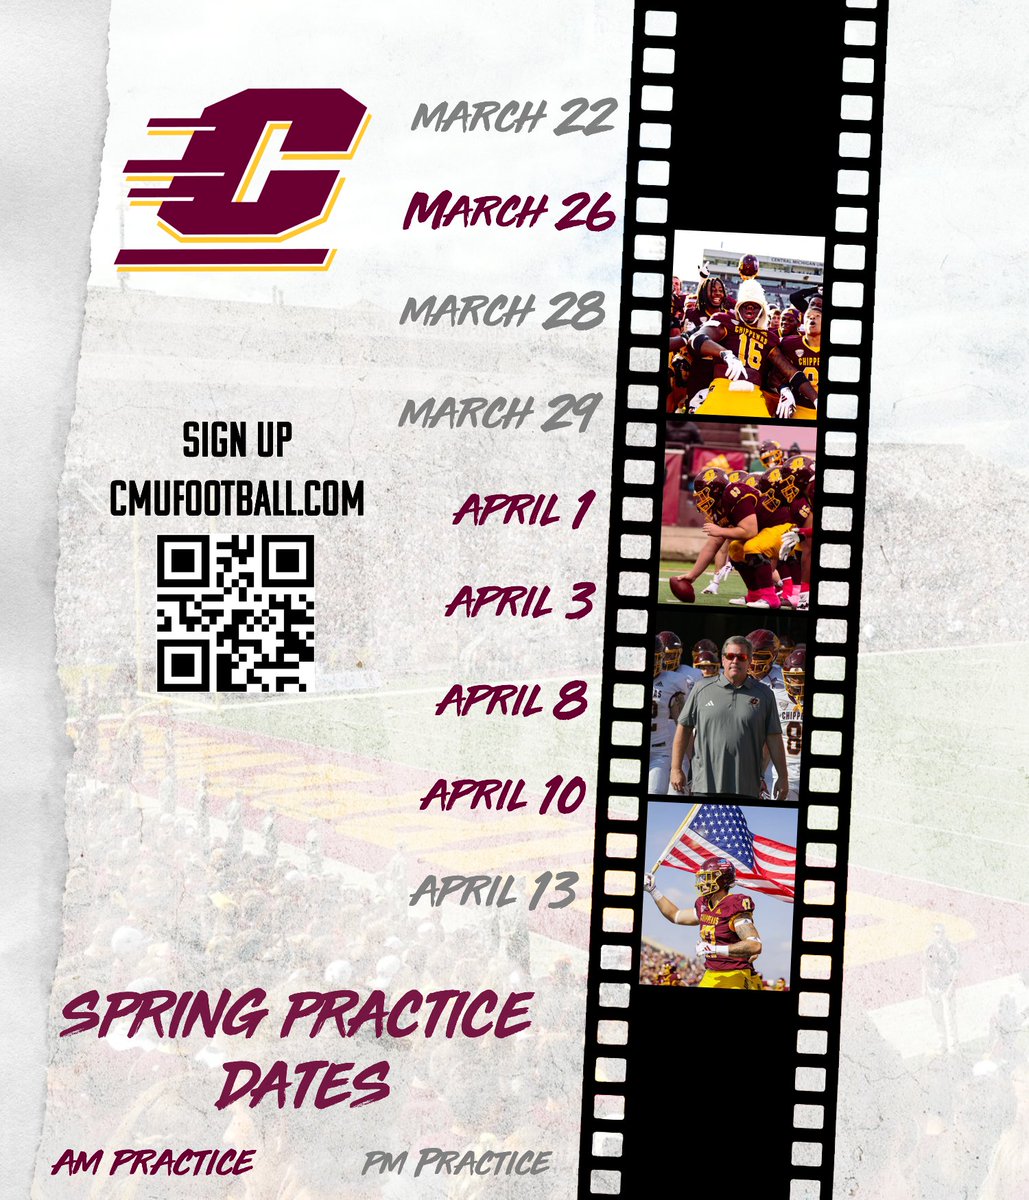 Come out and visit the Chips! Spring practice is about to be underway! Visit cmufootball.com to register. #FireUpChips 🔥⬆️